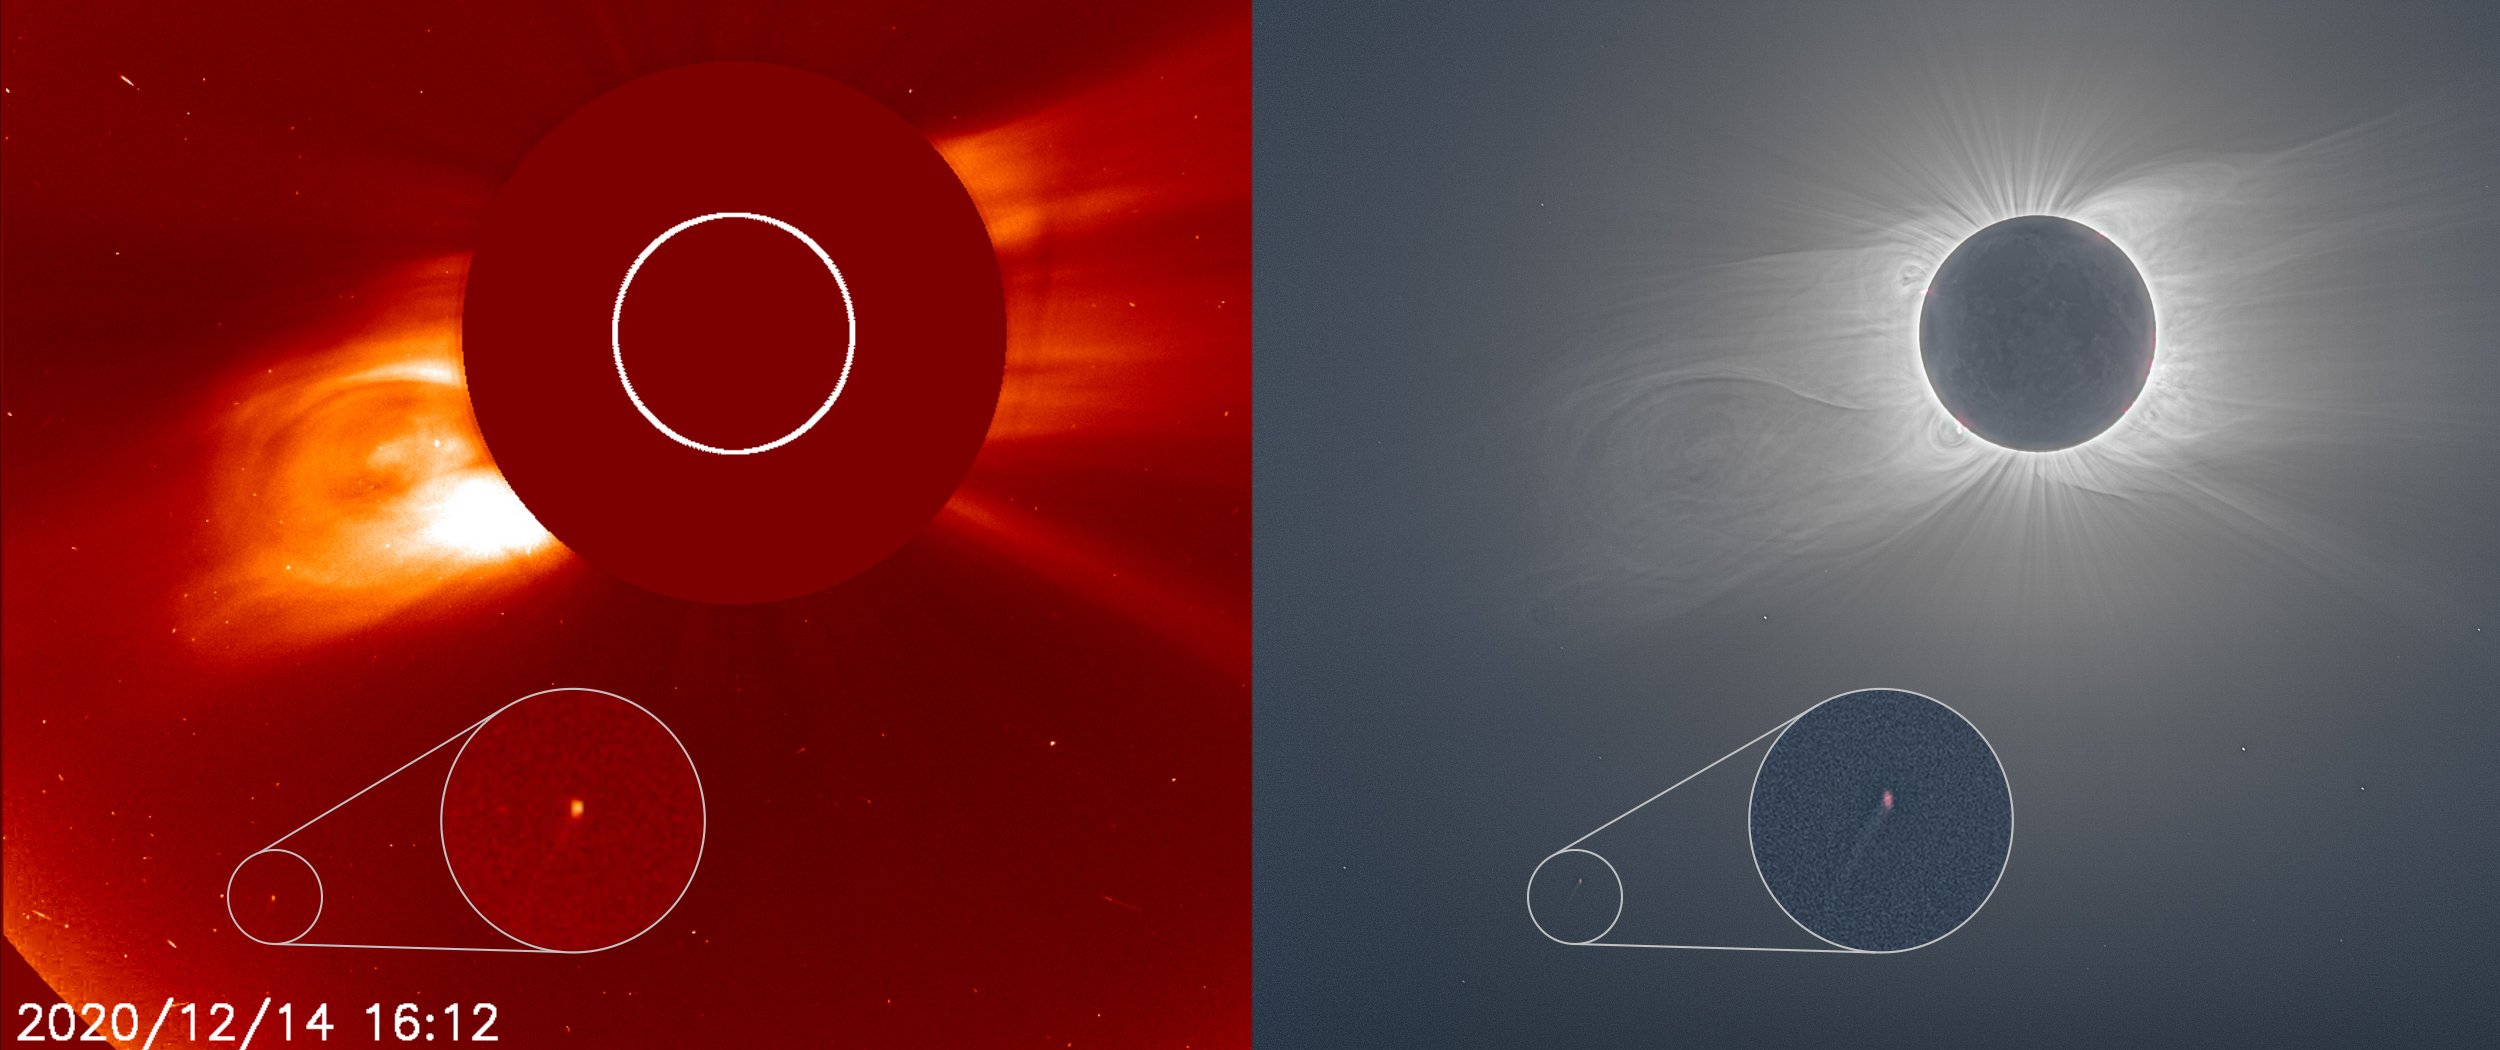 Two side-by-side images show a comet close to the Sun. The image on the right shows the Sun's corona shining brightly during a total solar eclipse.